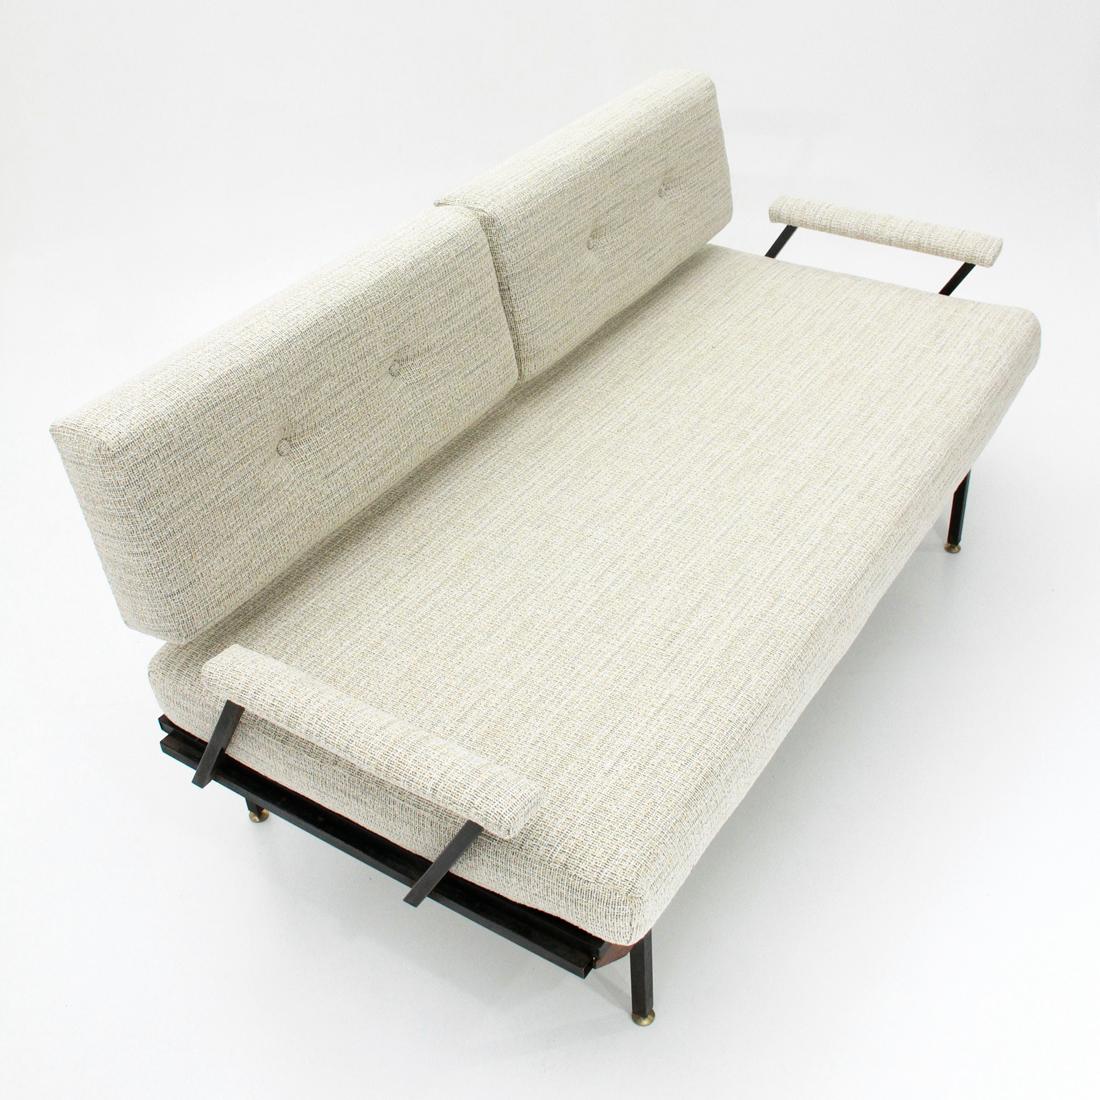 Italian manufacturing sofa bed produced in the 1950s.
Structure in black painted metal.
Solid wood strips.
Seat and back formed by padded cushions and lined with new fabric.
Height adjustable feet in brass.
Good general conditions, some signs